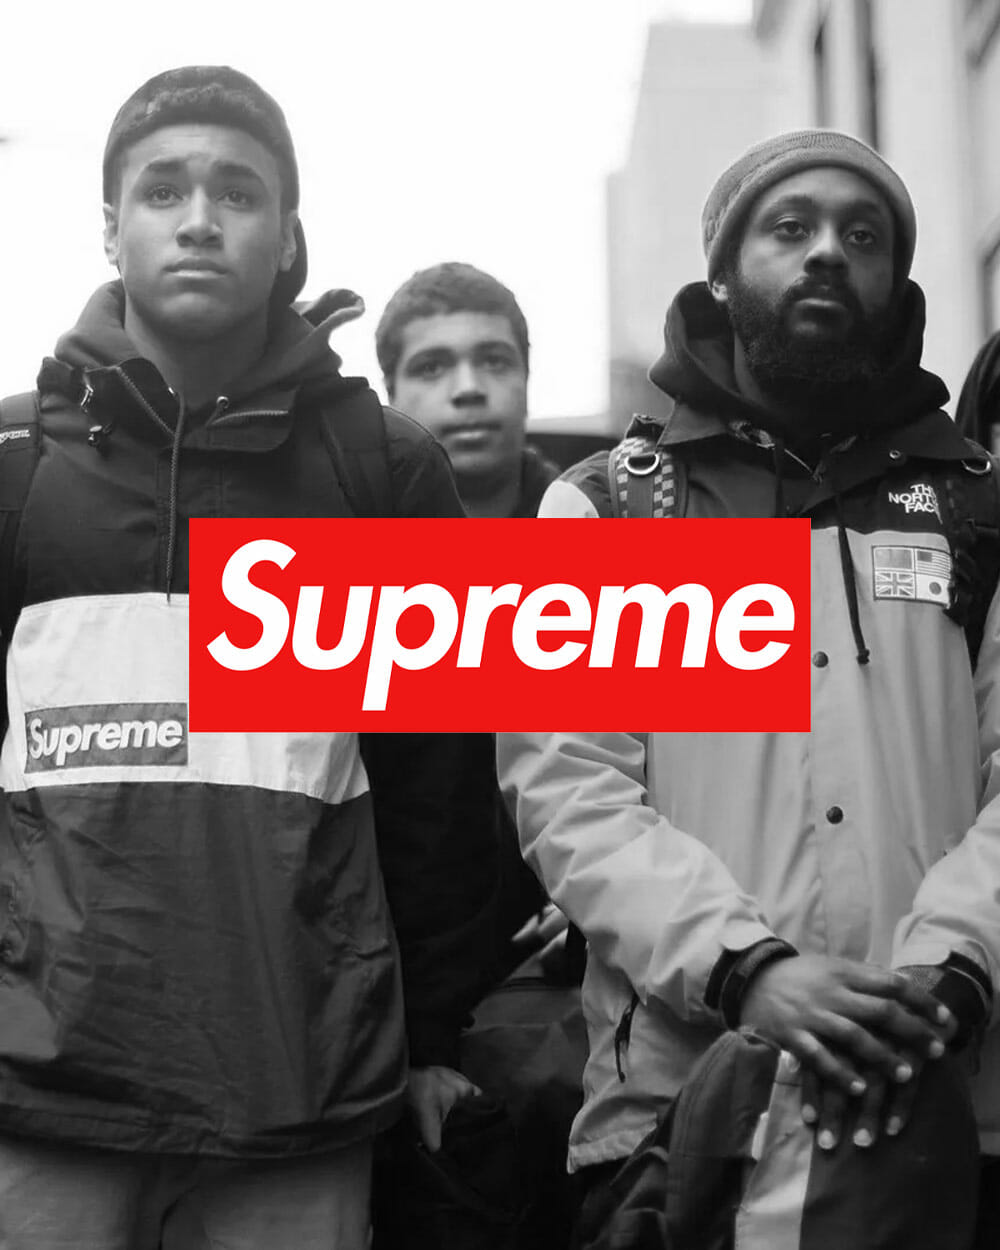 Supreme community, fans, and resellers